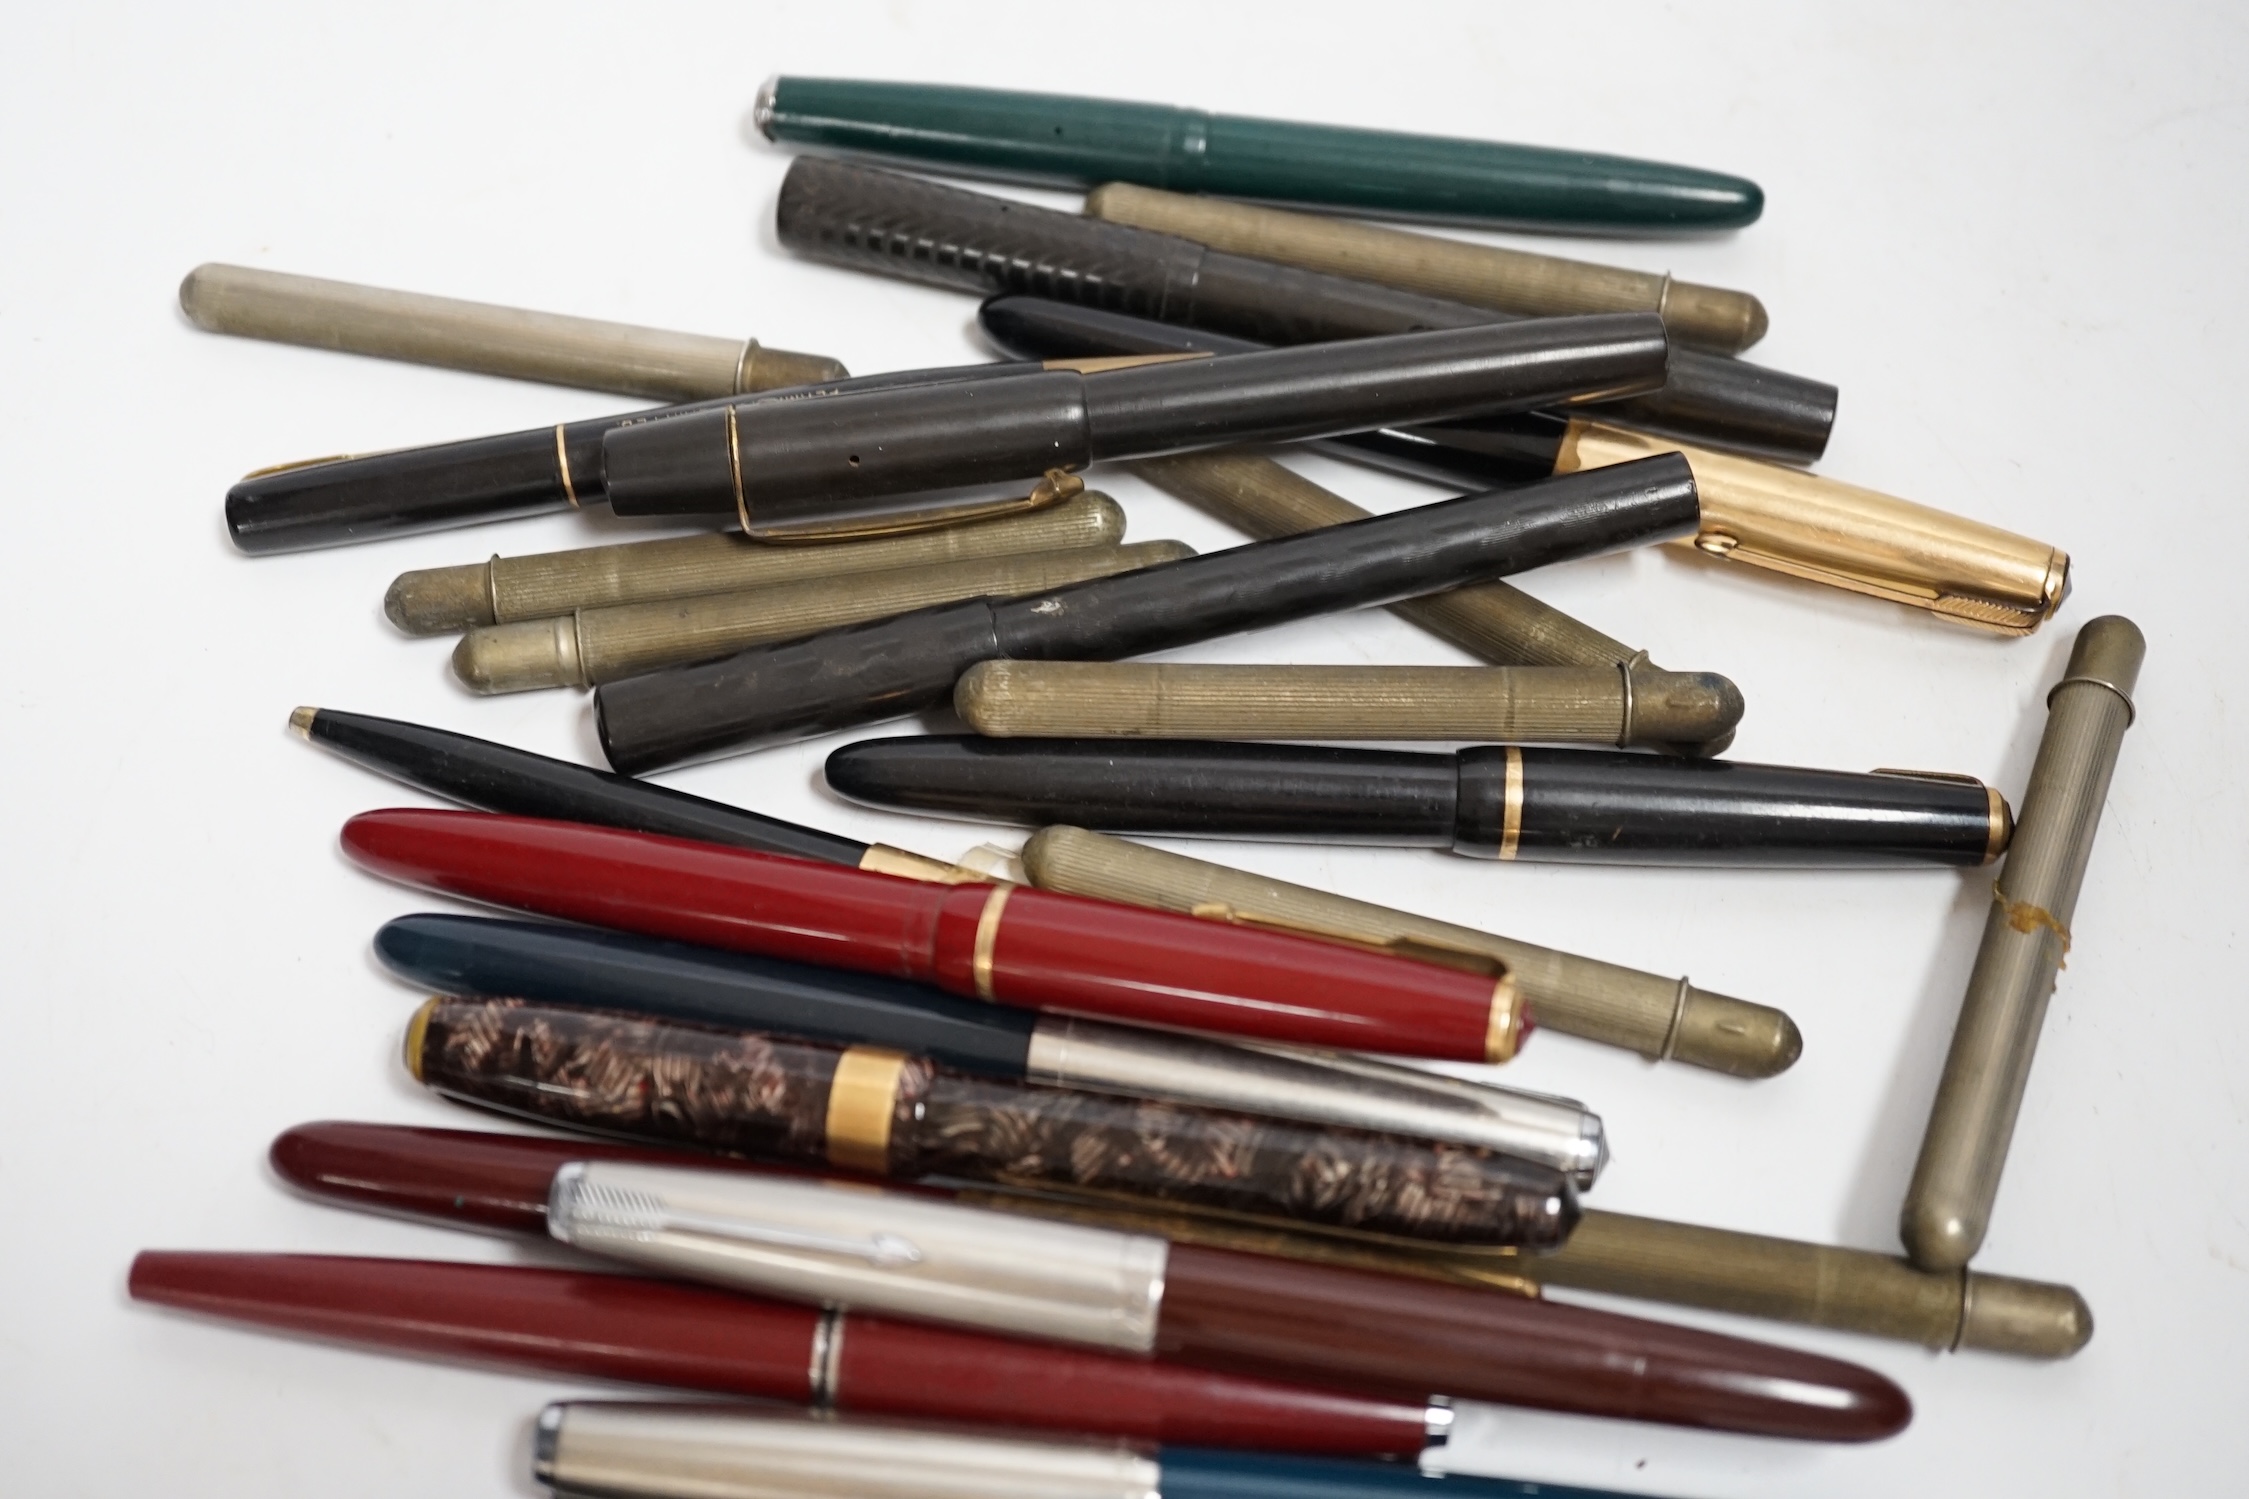 A quantity of fountain pens including Parker. Some with 14k gold nibs